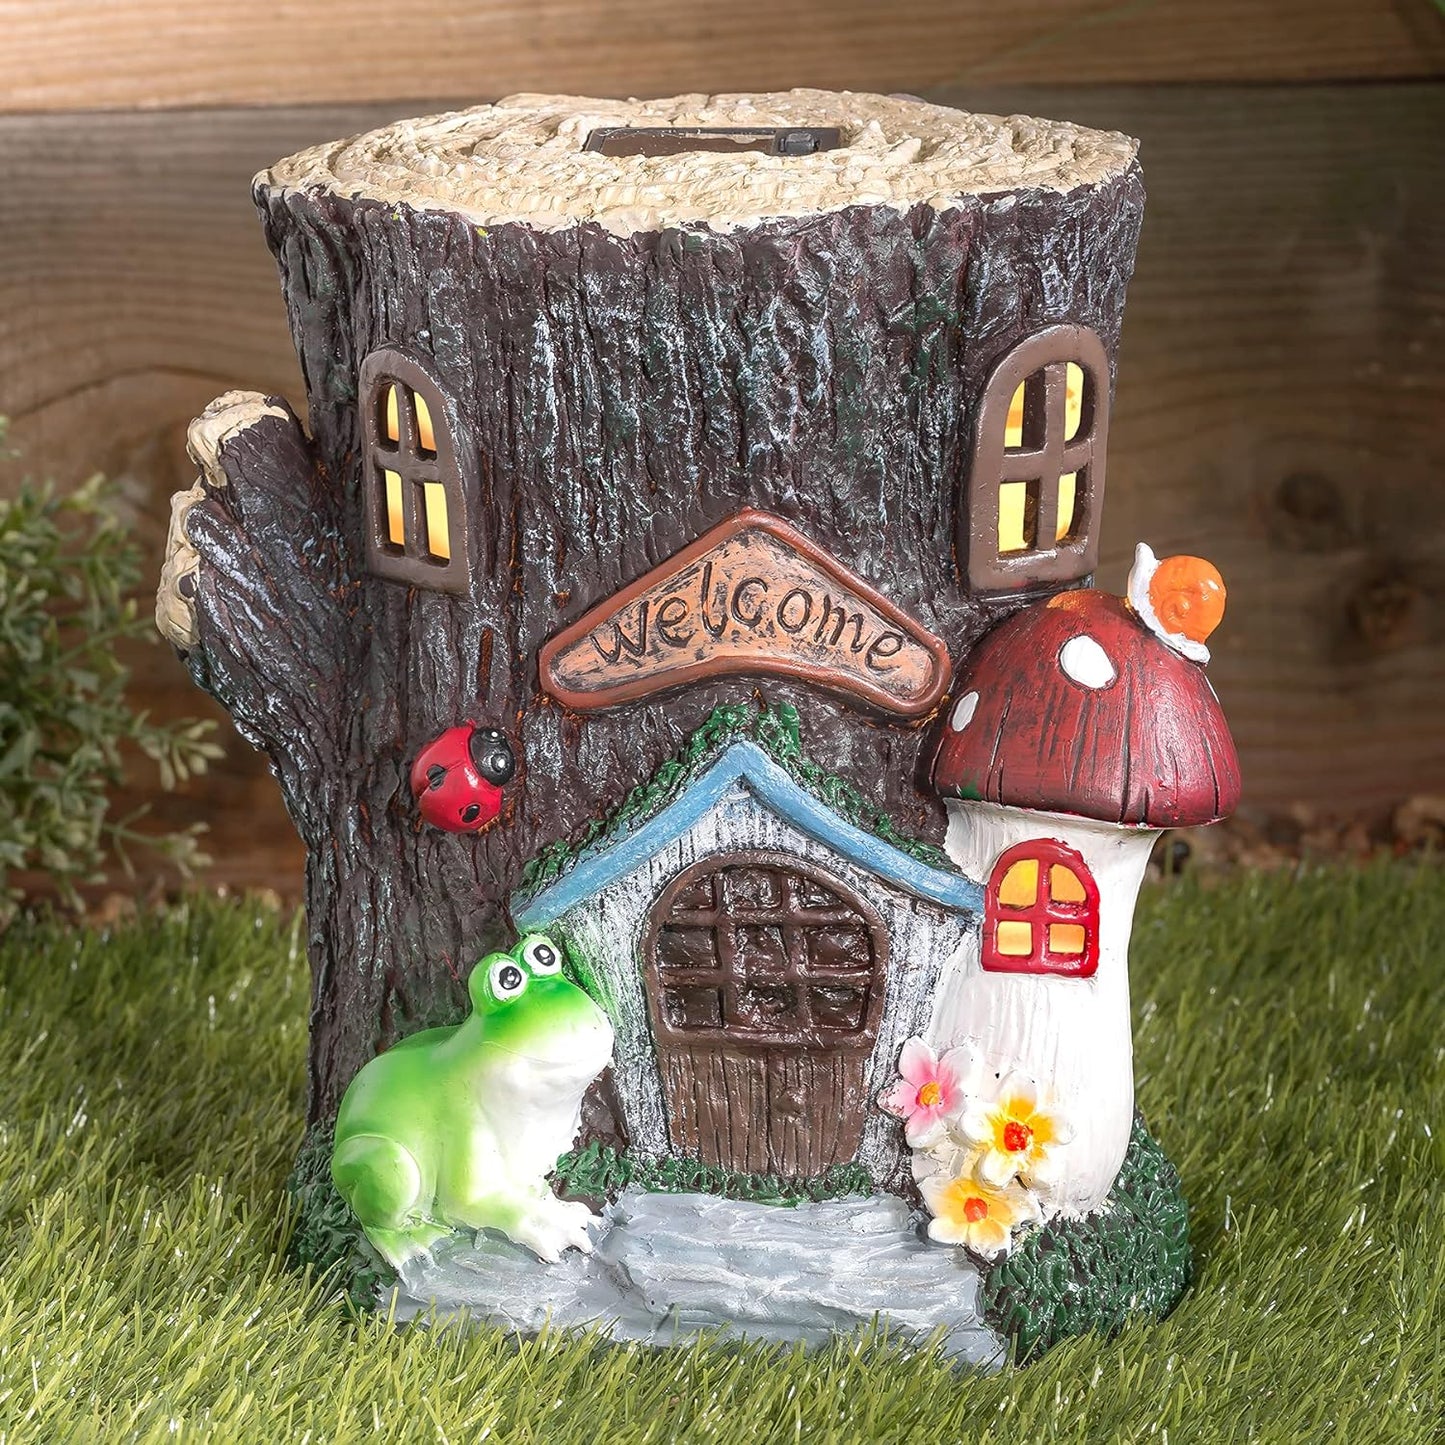 Solar Garden Ornaments Outdoor - Welcome Illuminated Wooden Pile House Garden Statues, Waterproof Resin Dwelling Ornament for Yard Lawn Garden Decorations and Gift